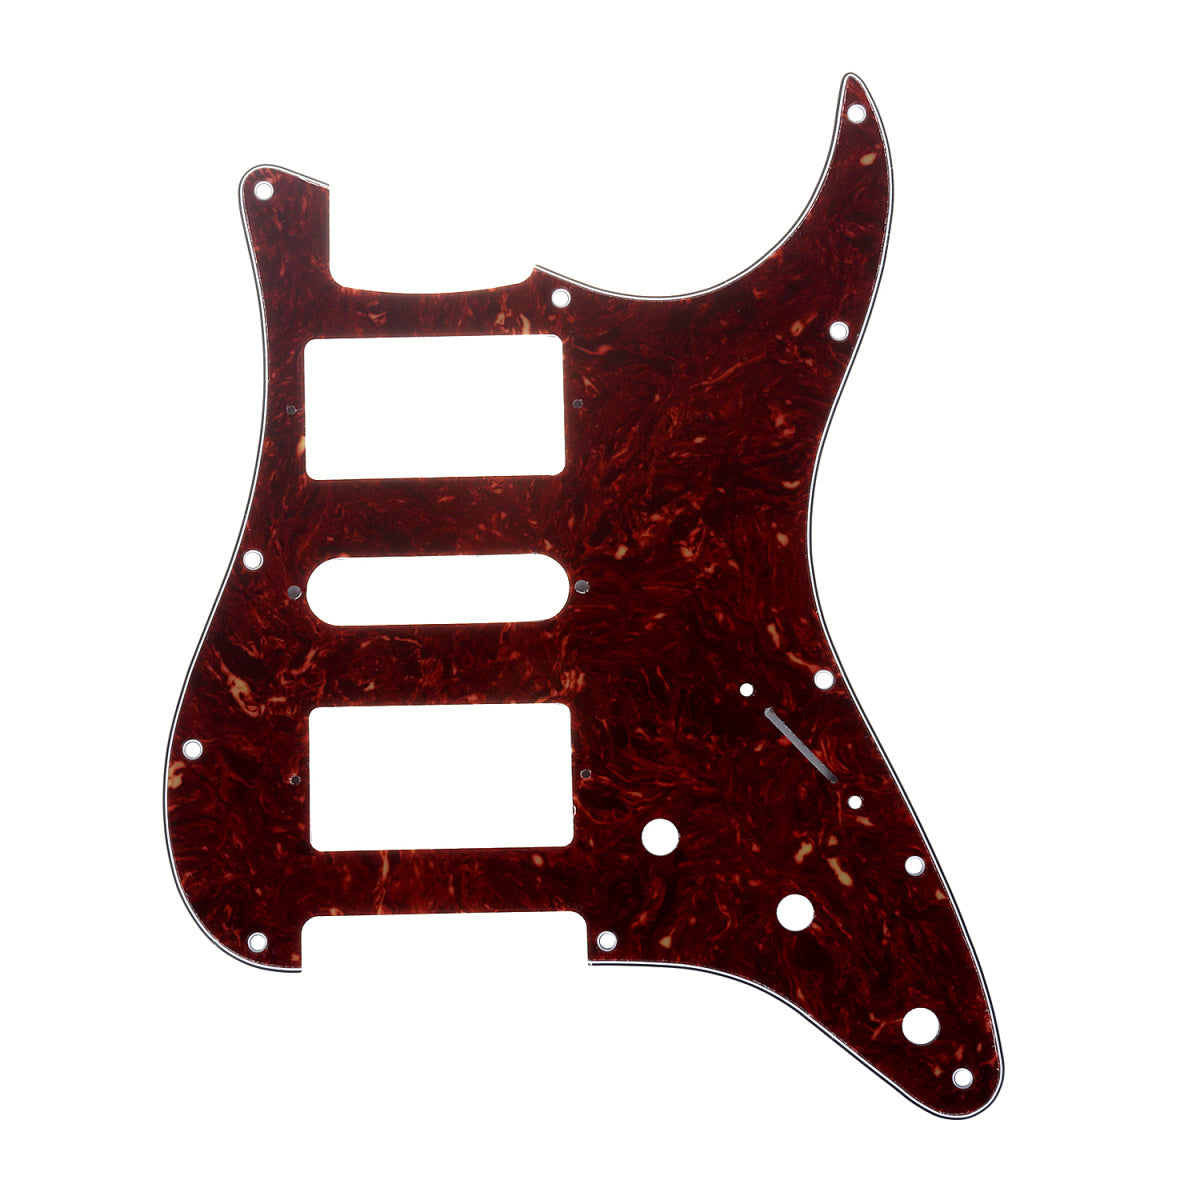 Musiclily Pro 11 Hole HSH Guitar Strat Pickguard for Fender American/Mexican Standard Stratocaster Modern Style, 4Ply Vintage Tortoise